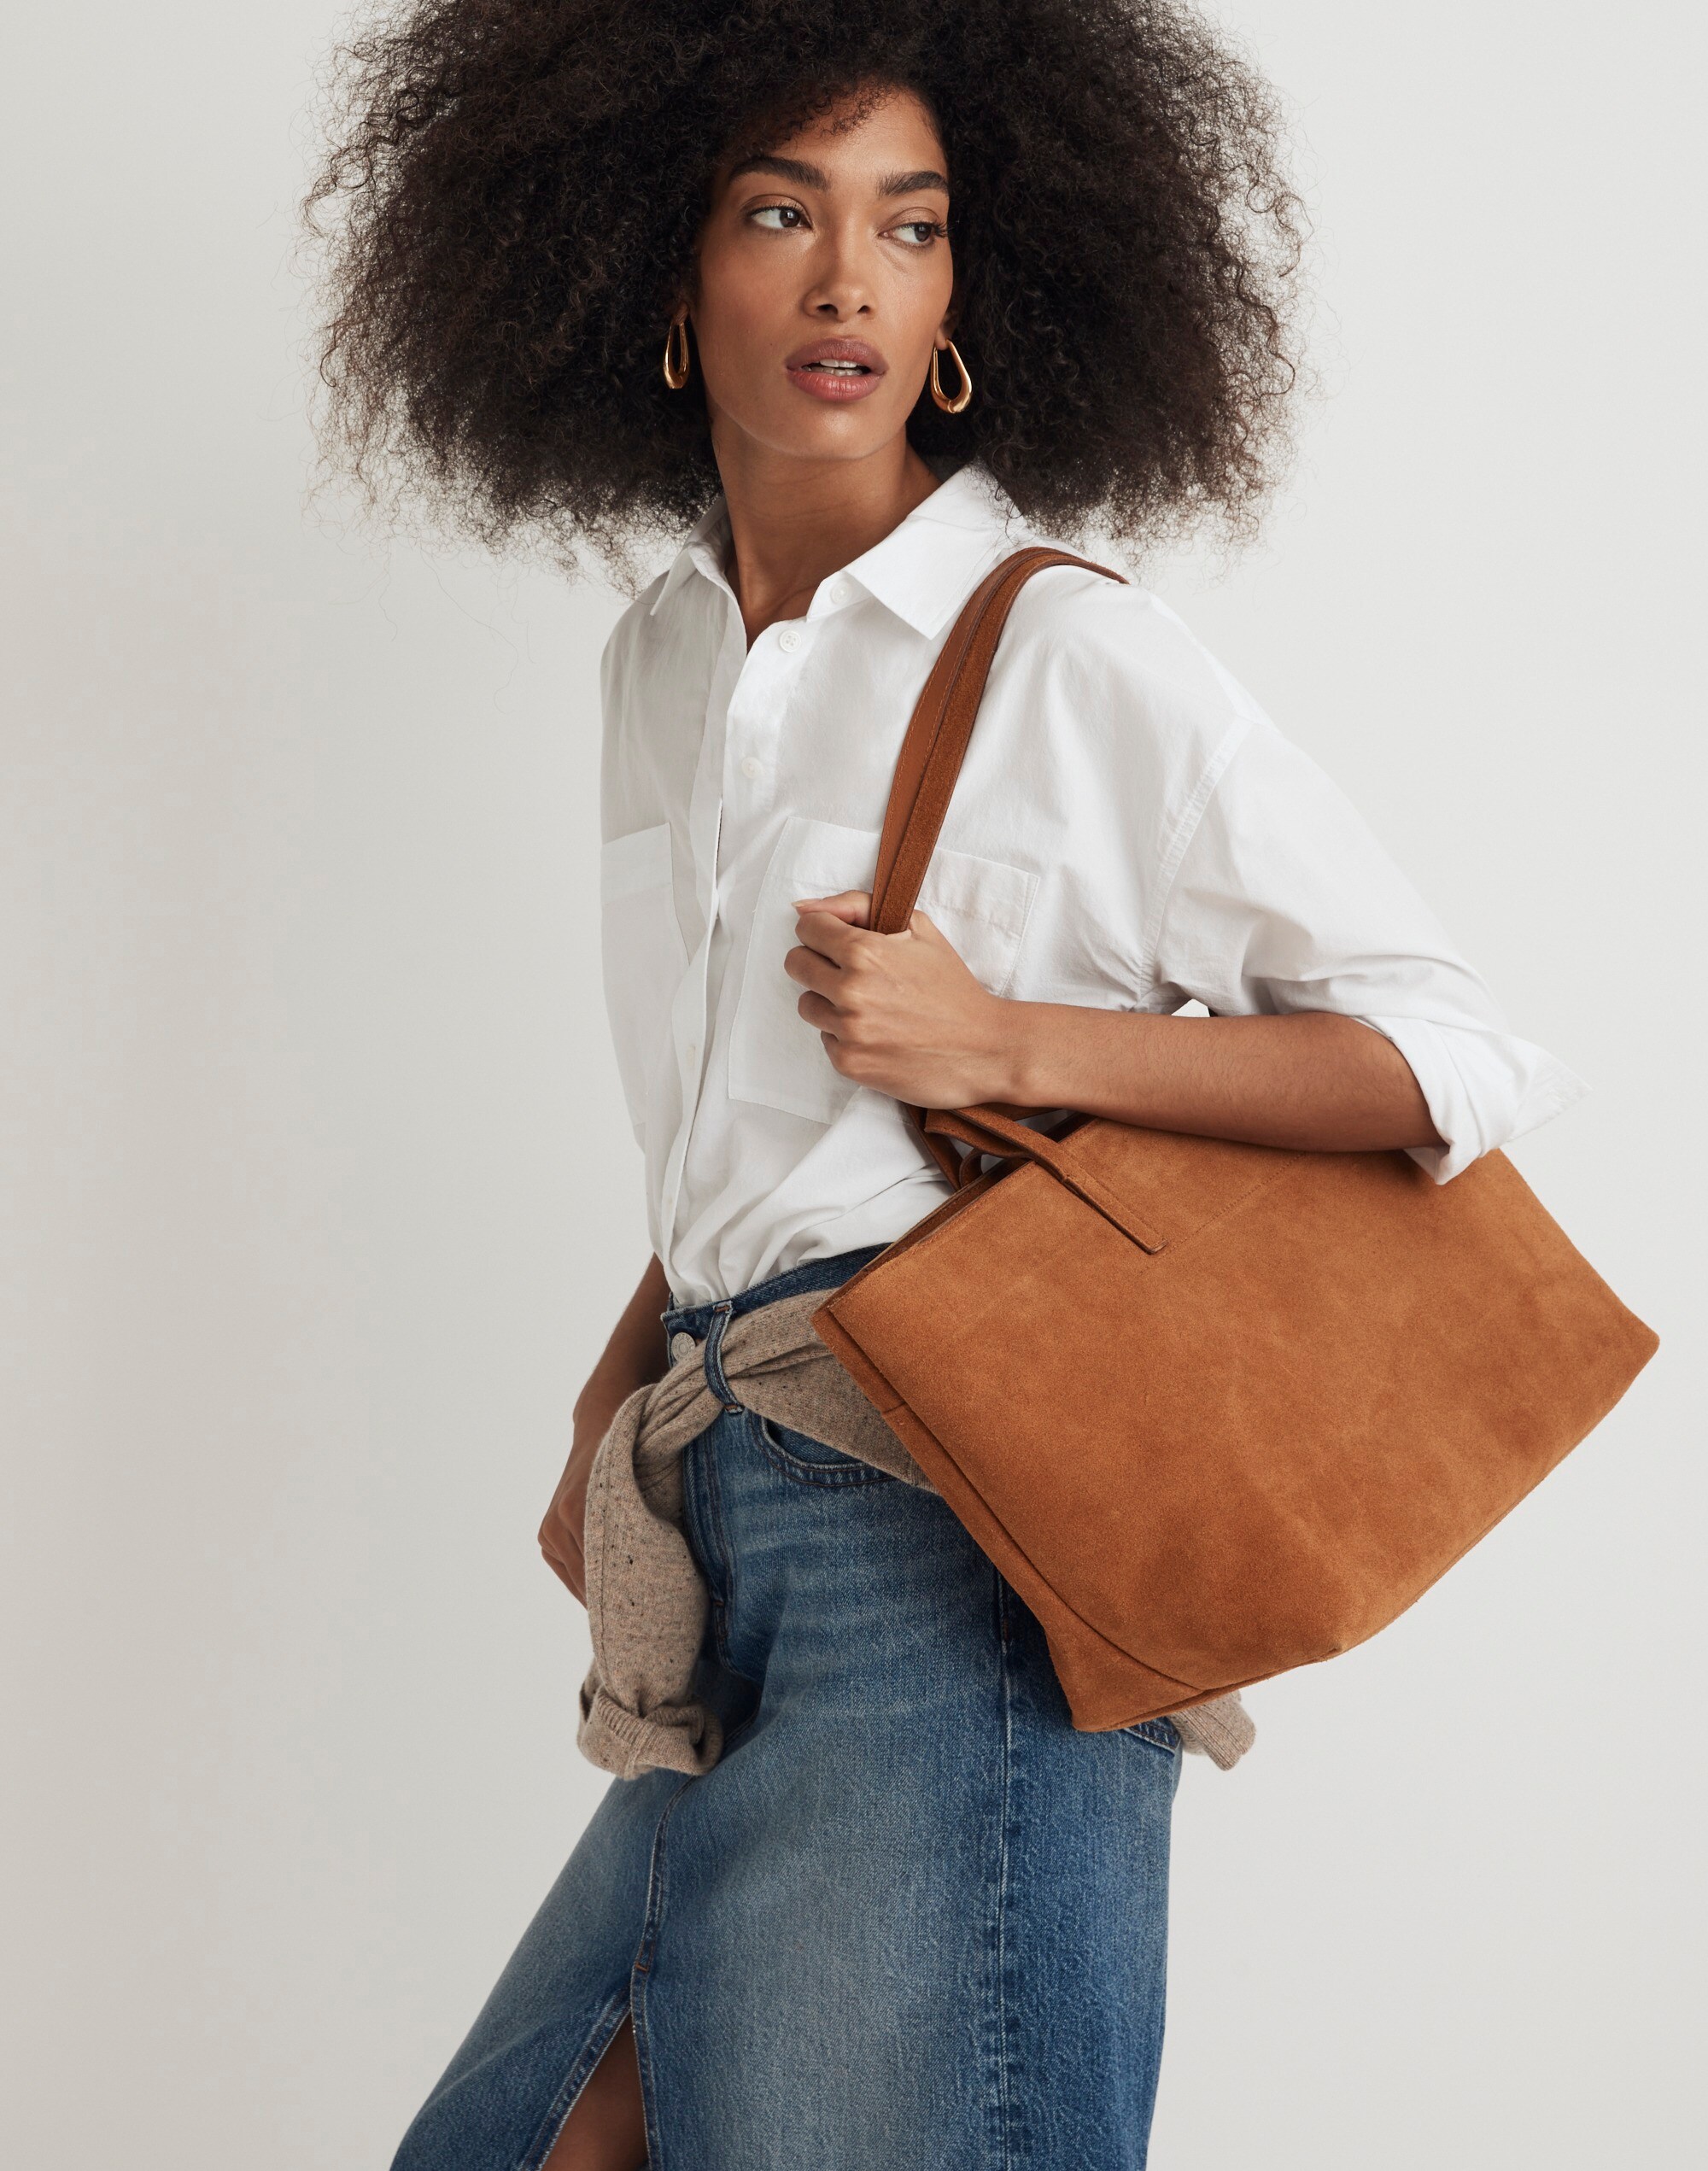 The Zip-Top Essential Tote in Suede